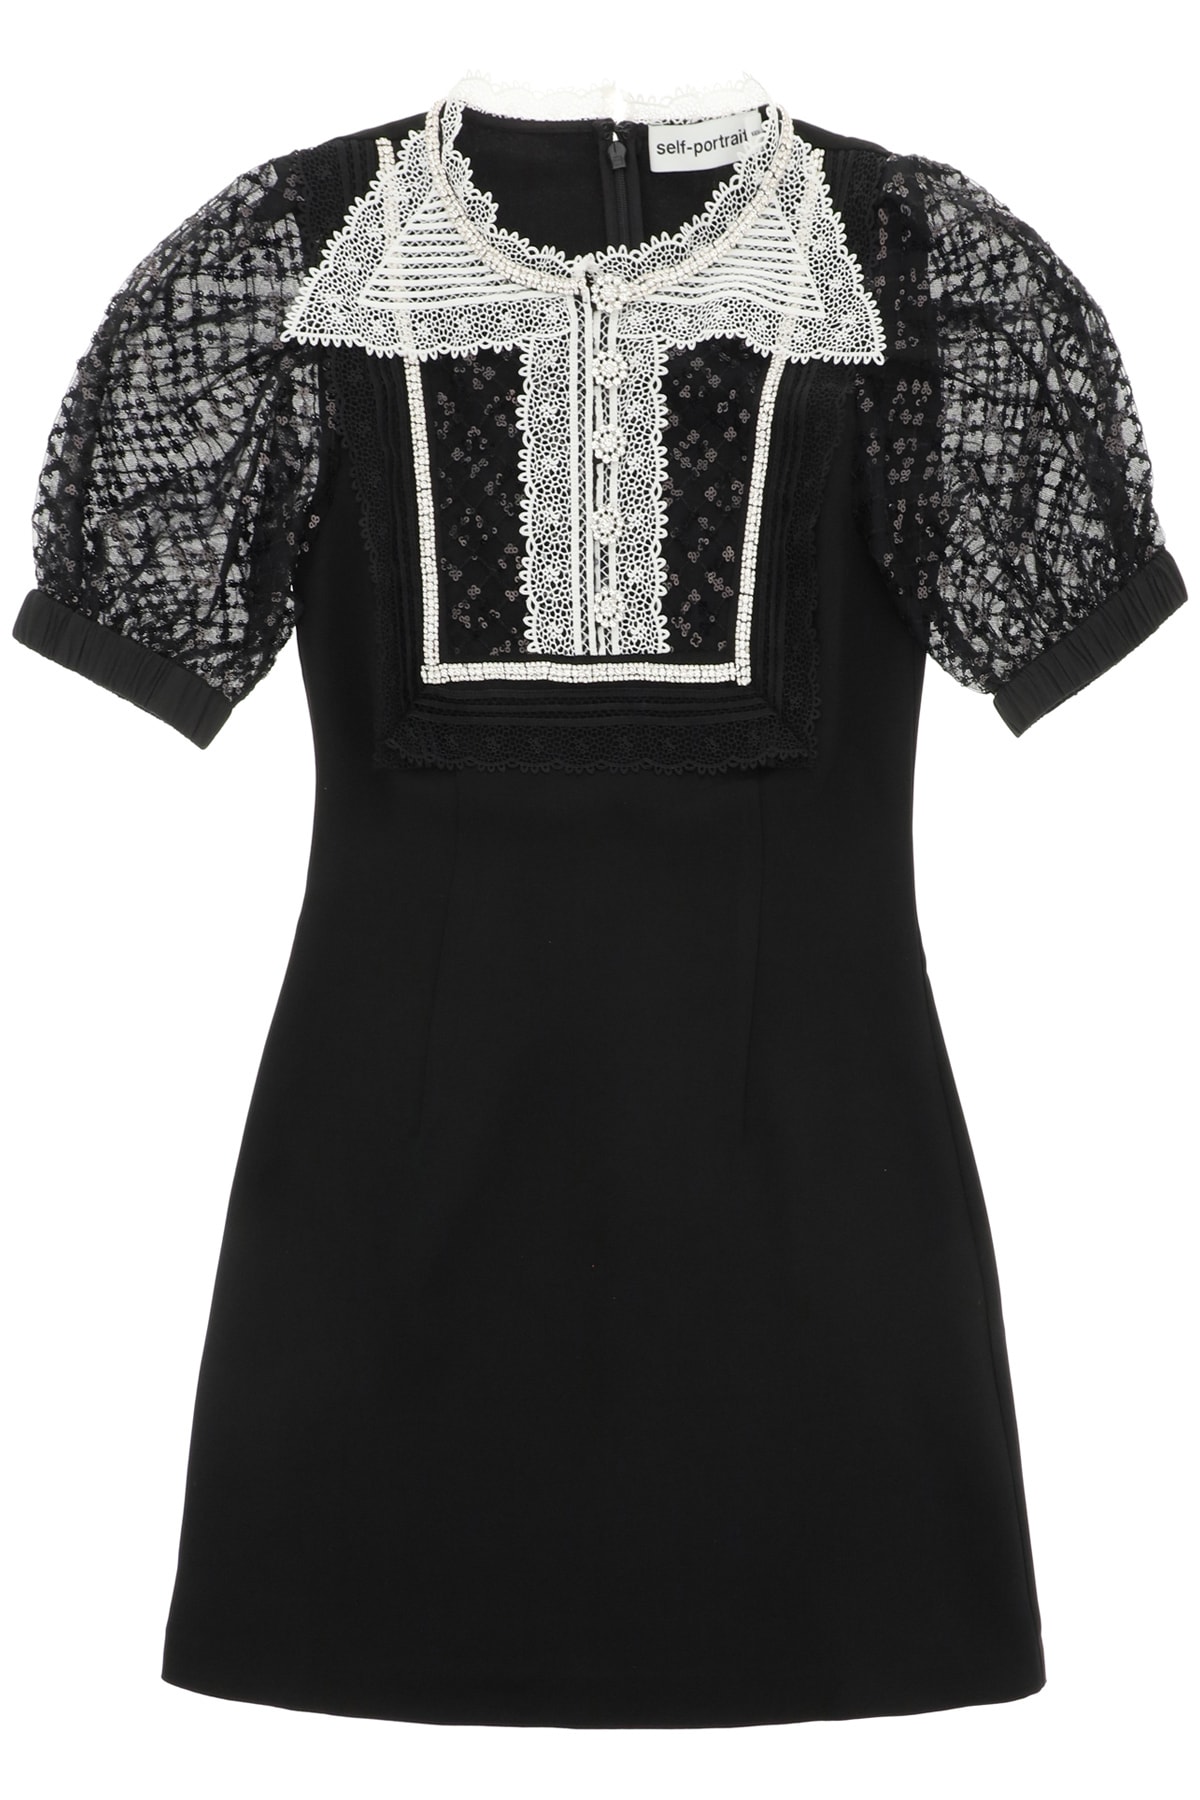 self-portrait Mini Dress In Crepe With Lace And Sequins